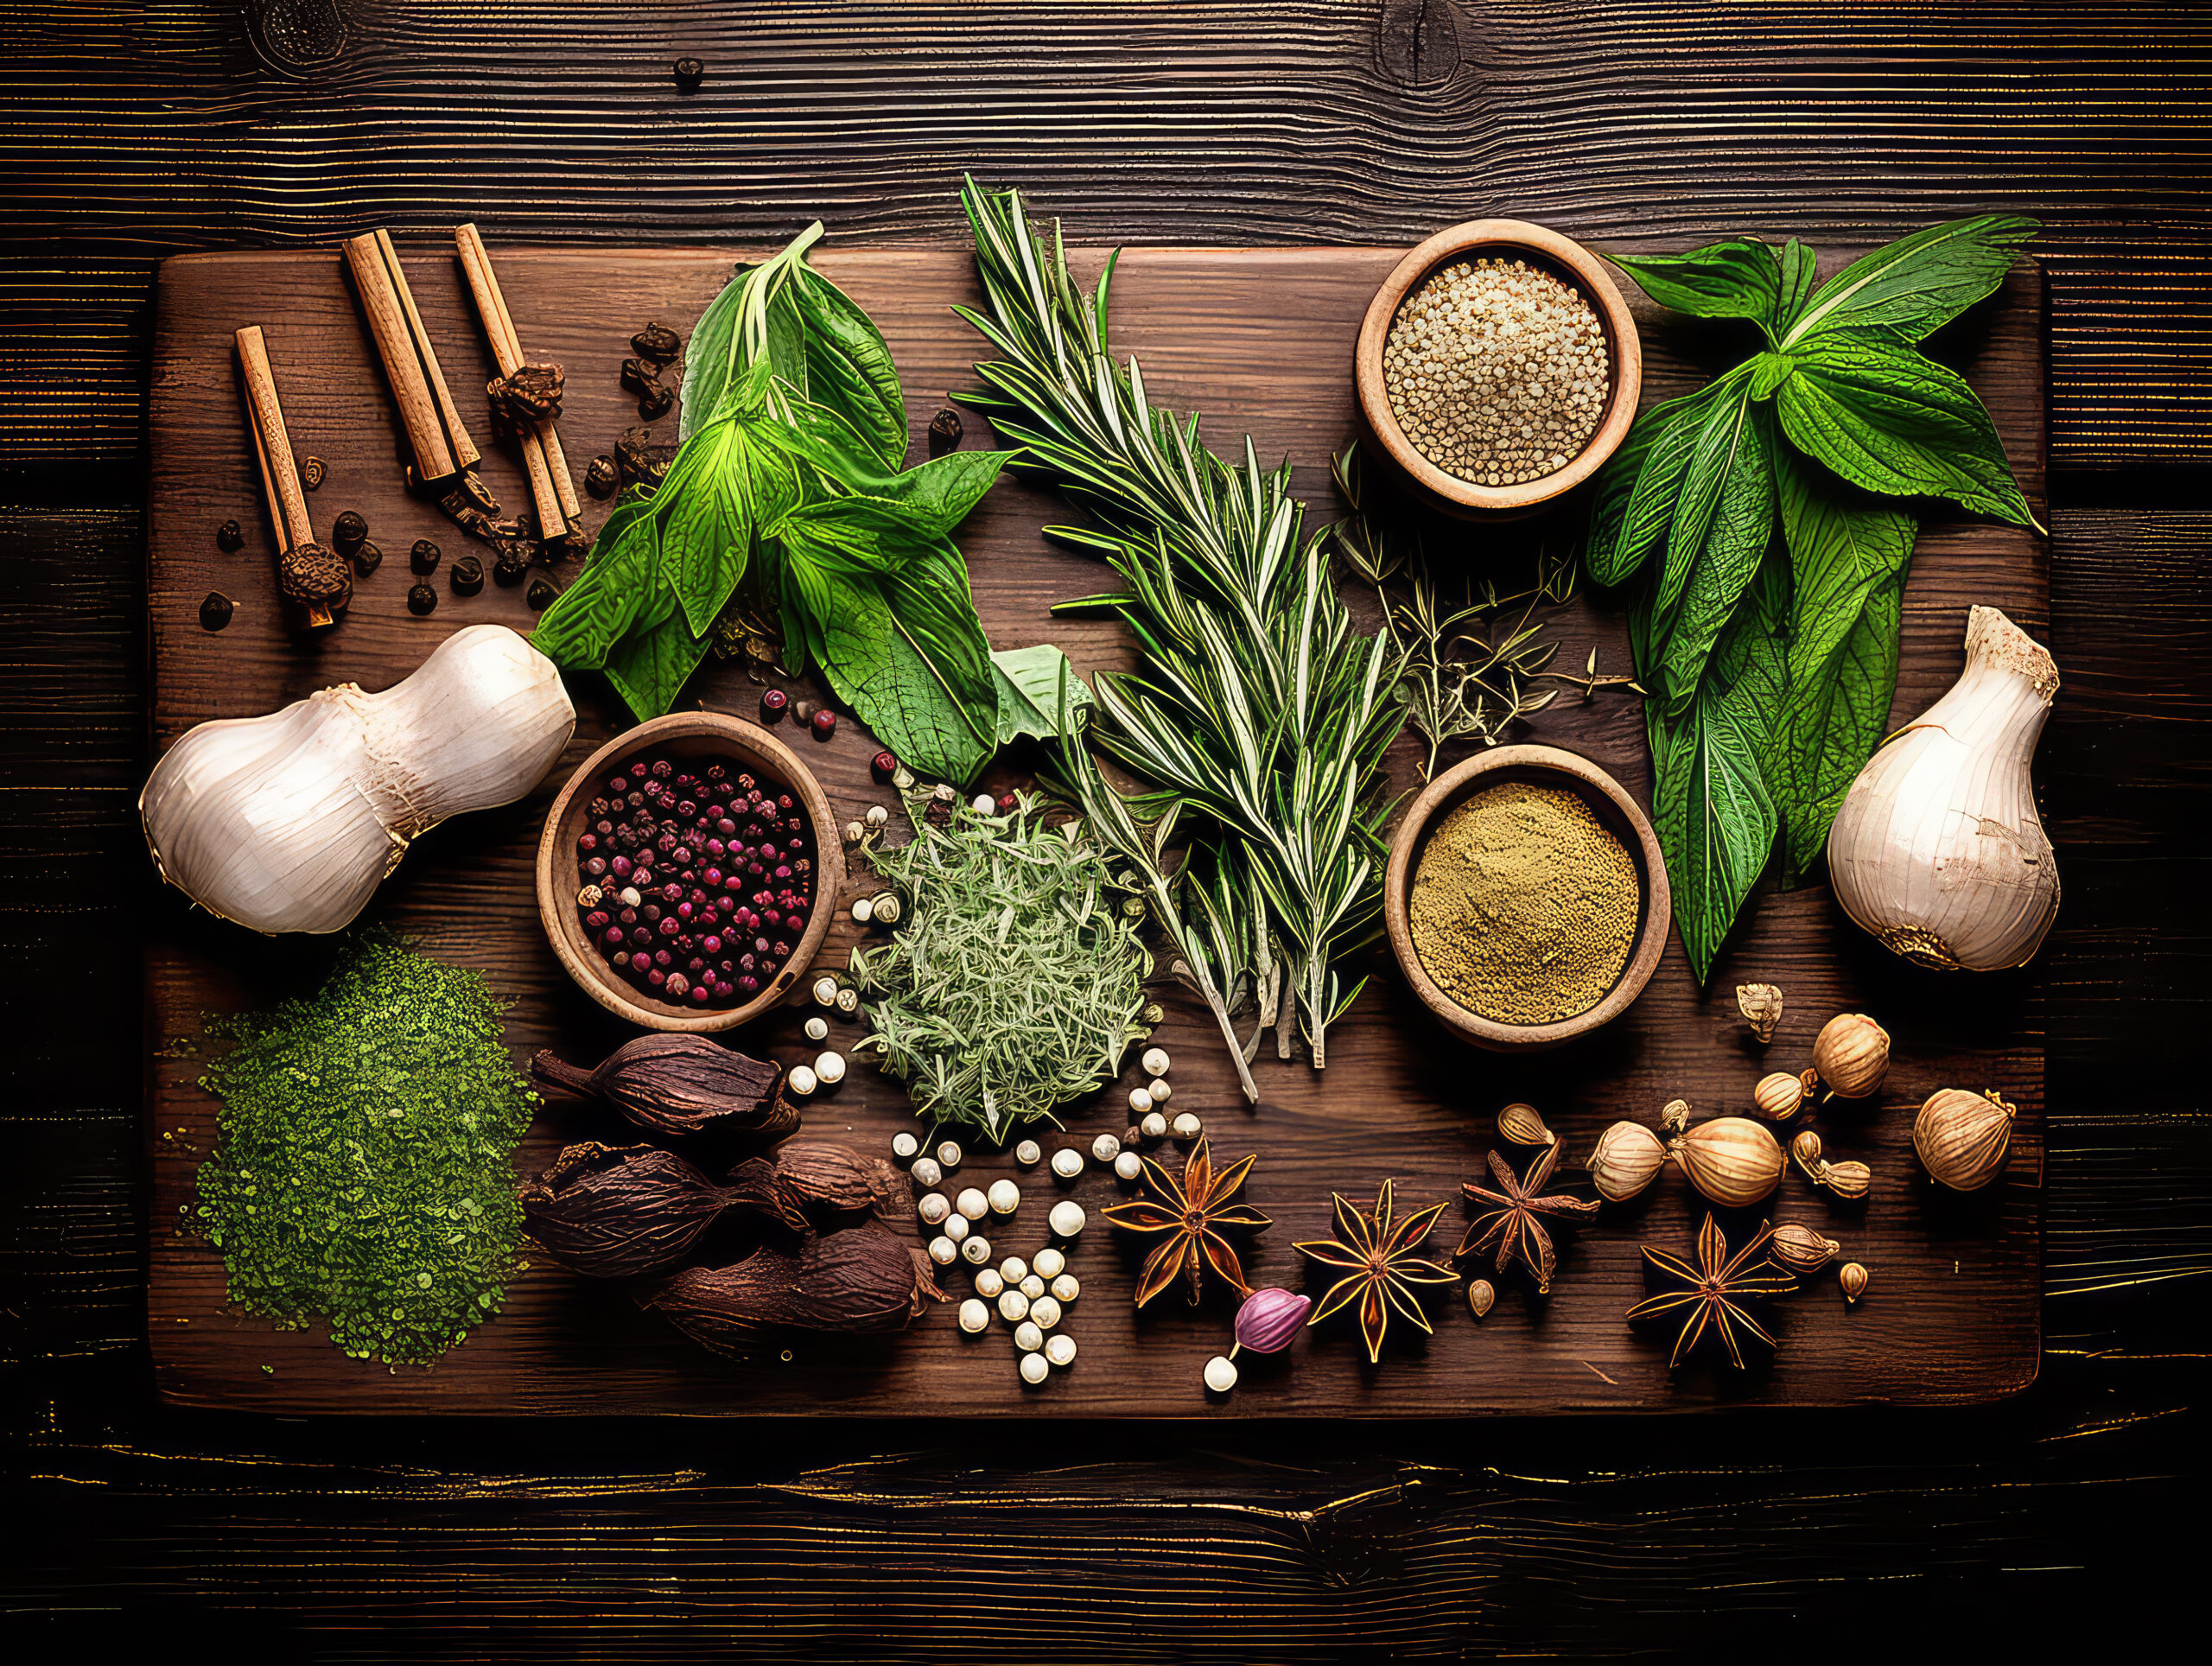 Selection of fresh spices and herbs on a dark wooden table - top view